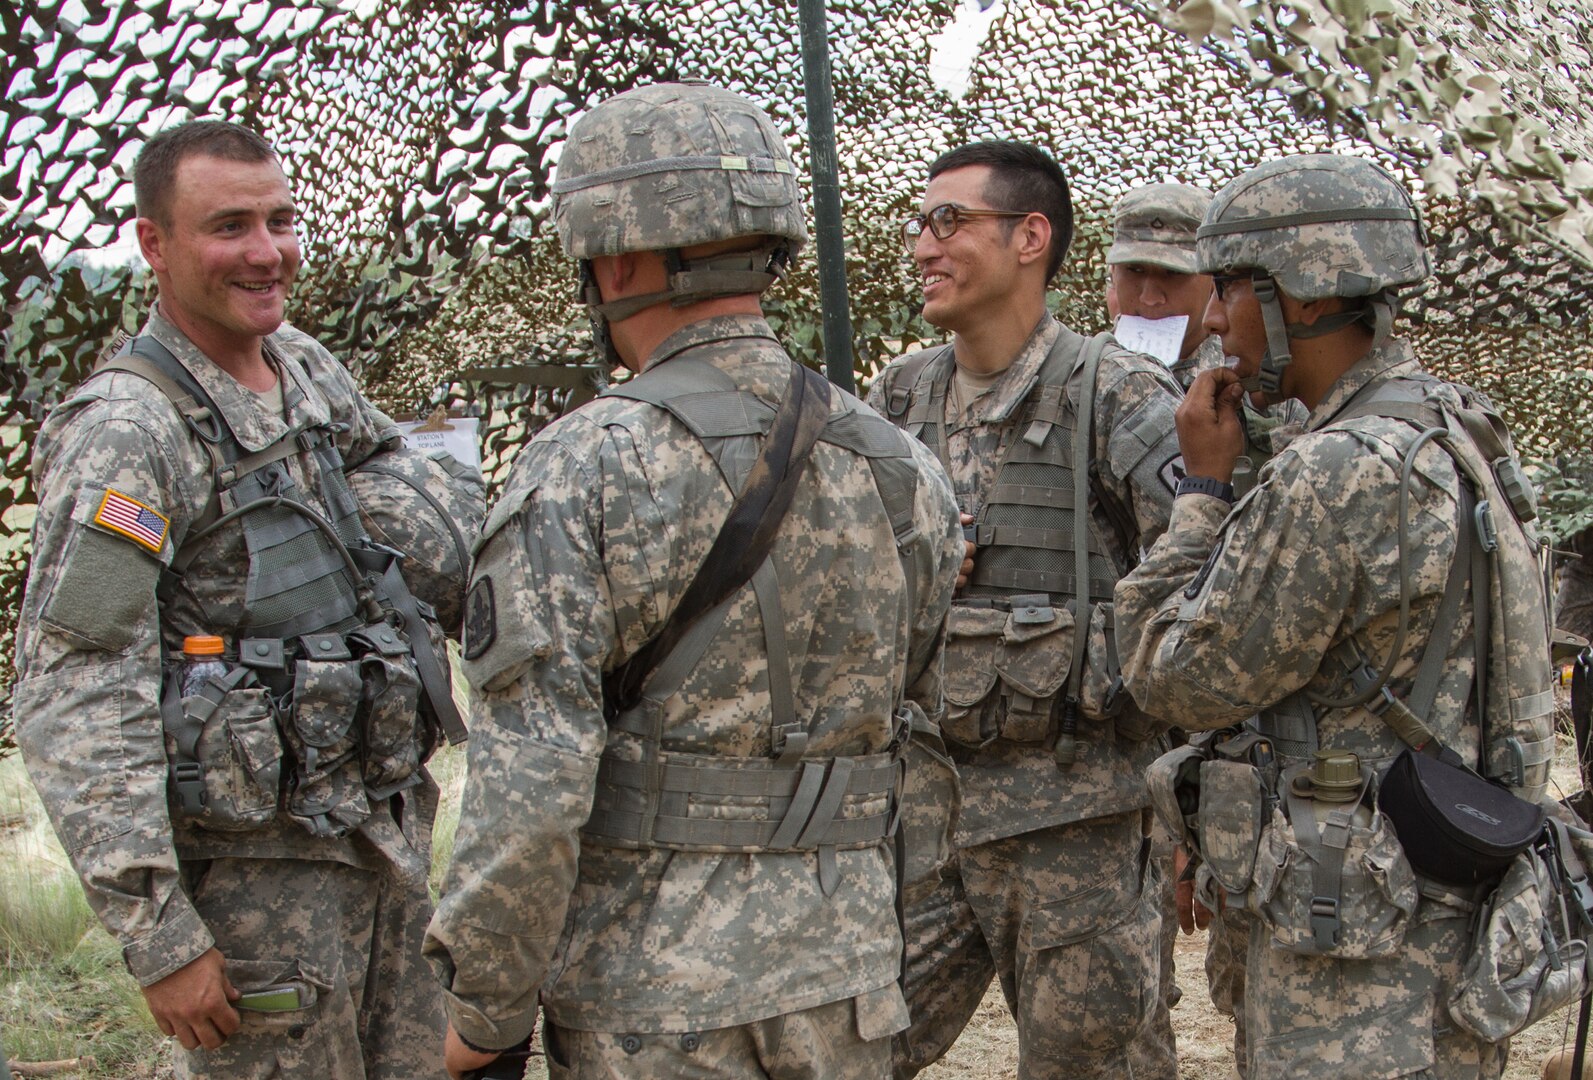 Arizona Army National Guard Soldiers joke with each other while waiting to be tested at the next Expert Infantry Badge station at Camp Navajo, Ariz., July 23, 2014.